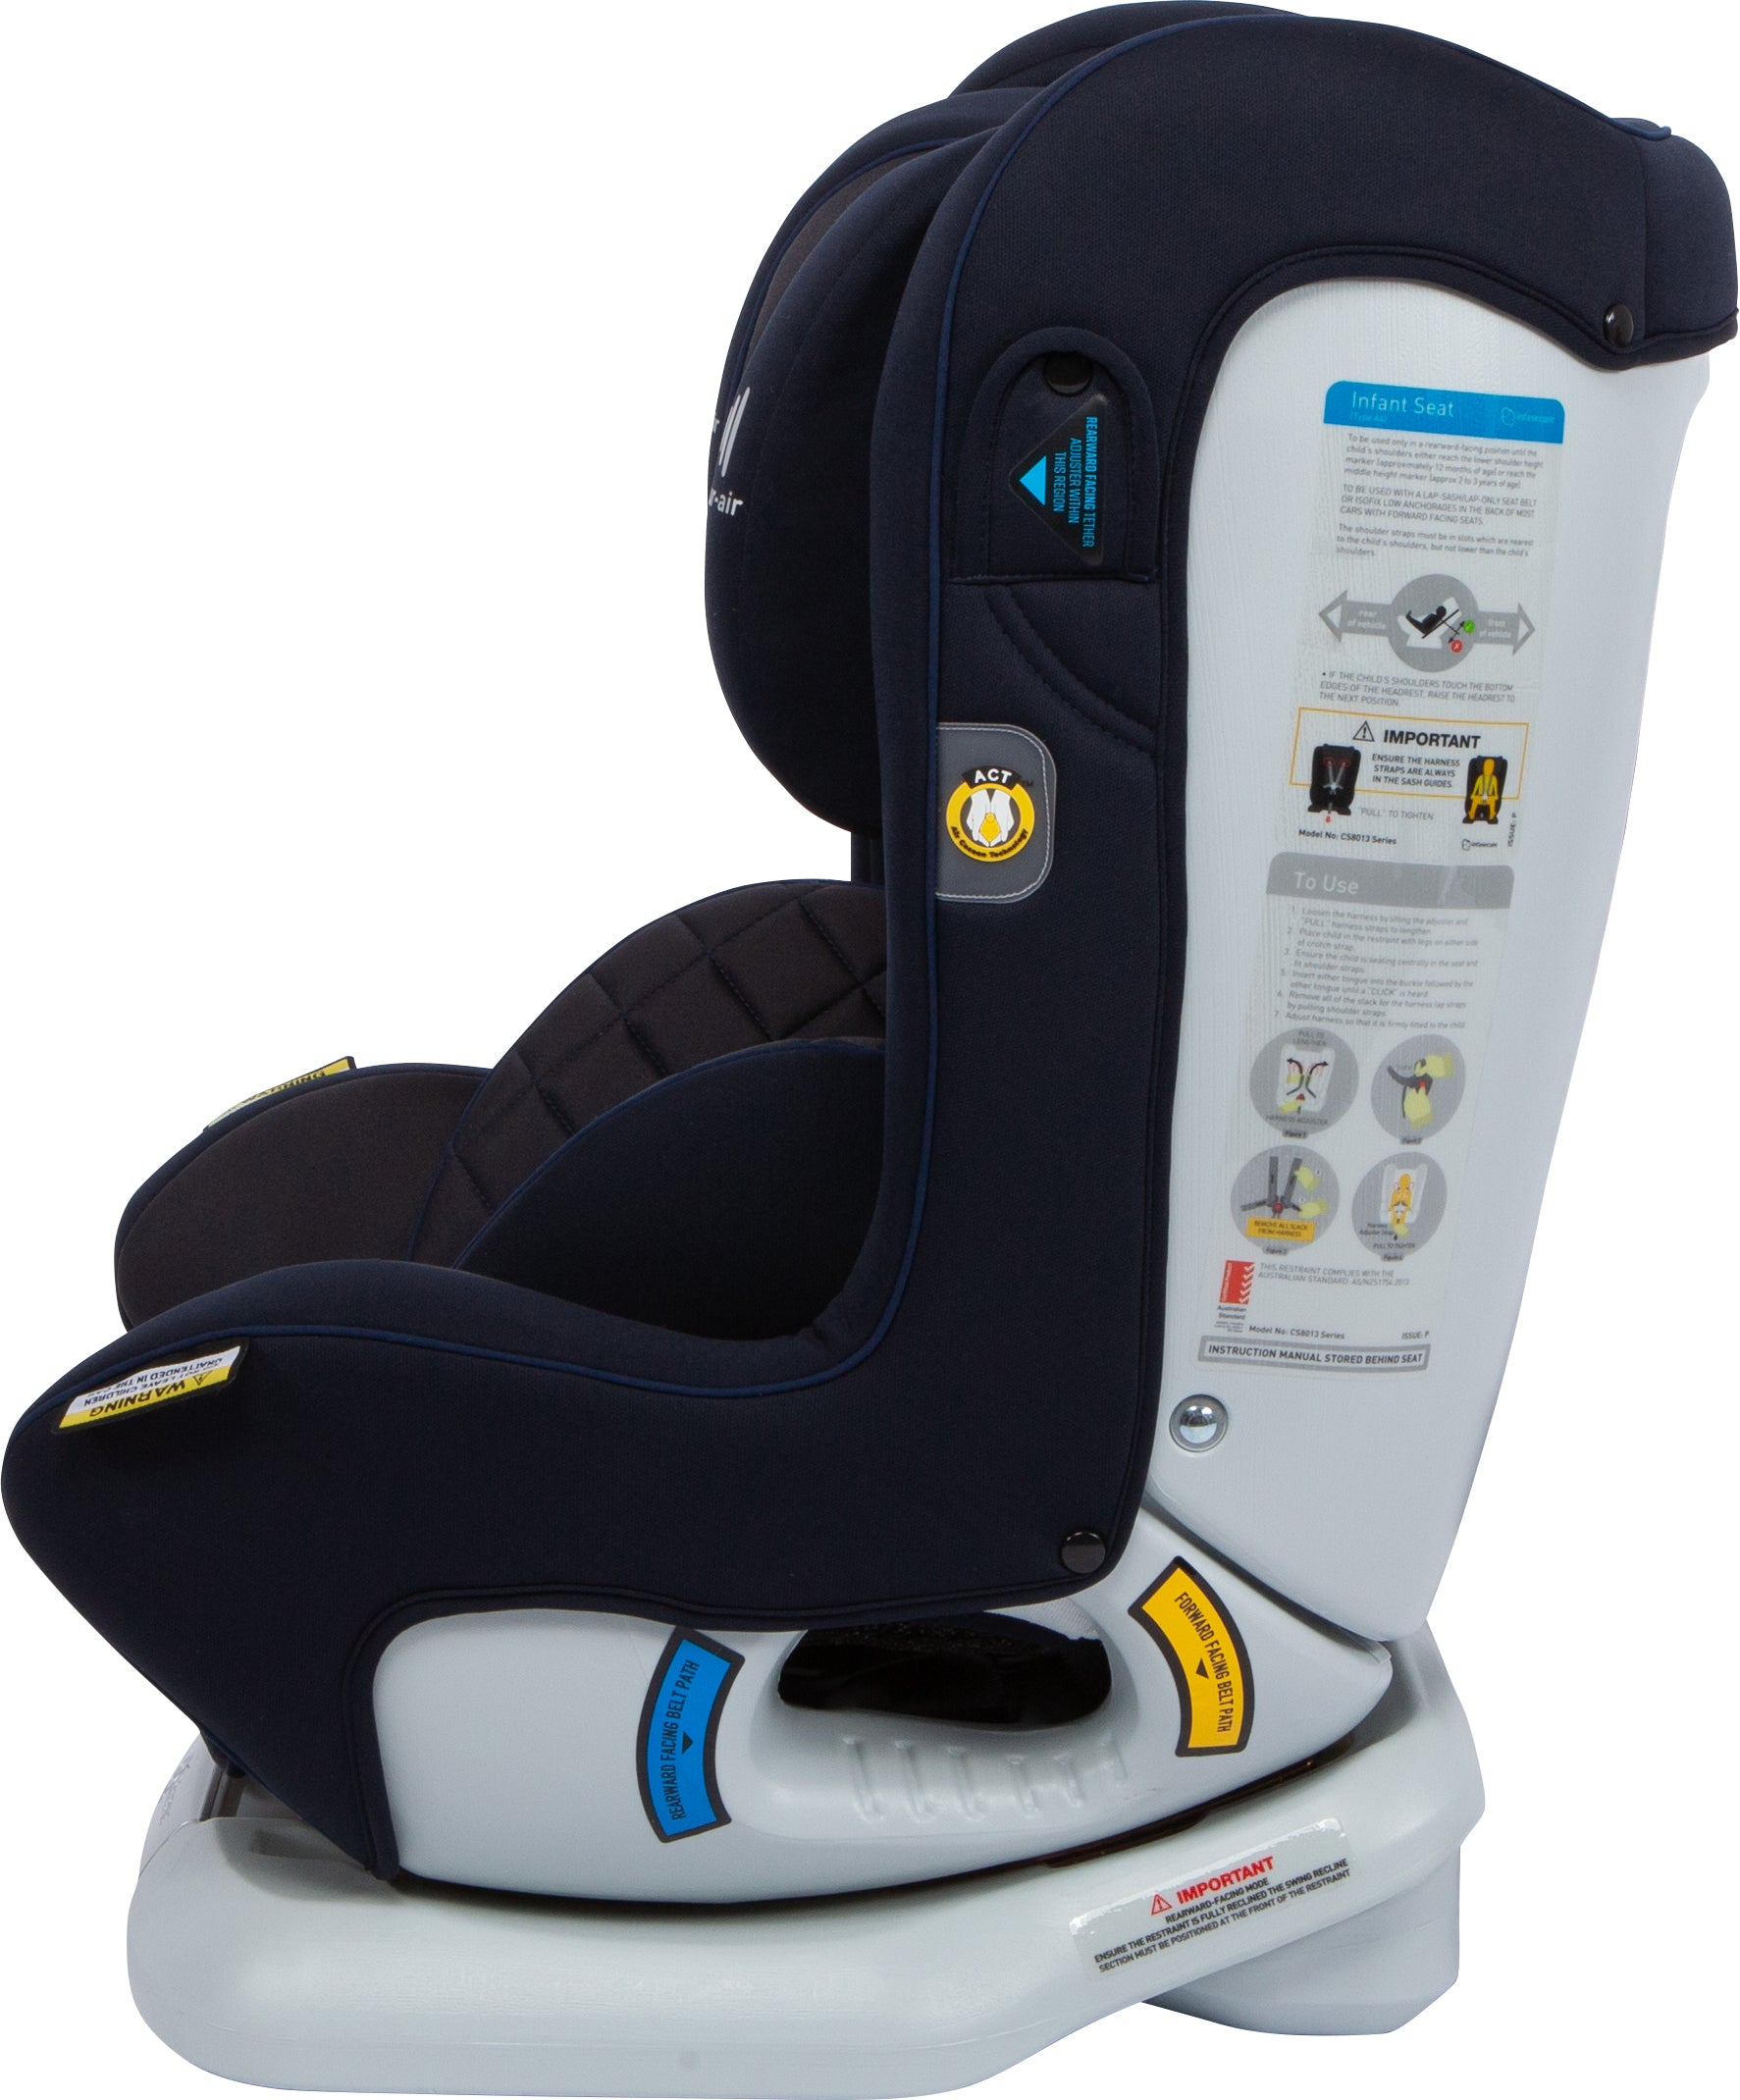 InfaSecure Attain More Isofix Compatible 0-4yrs